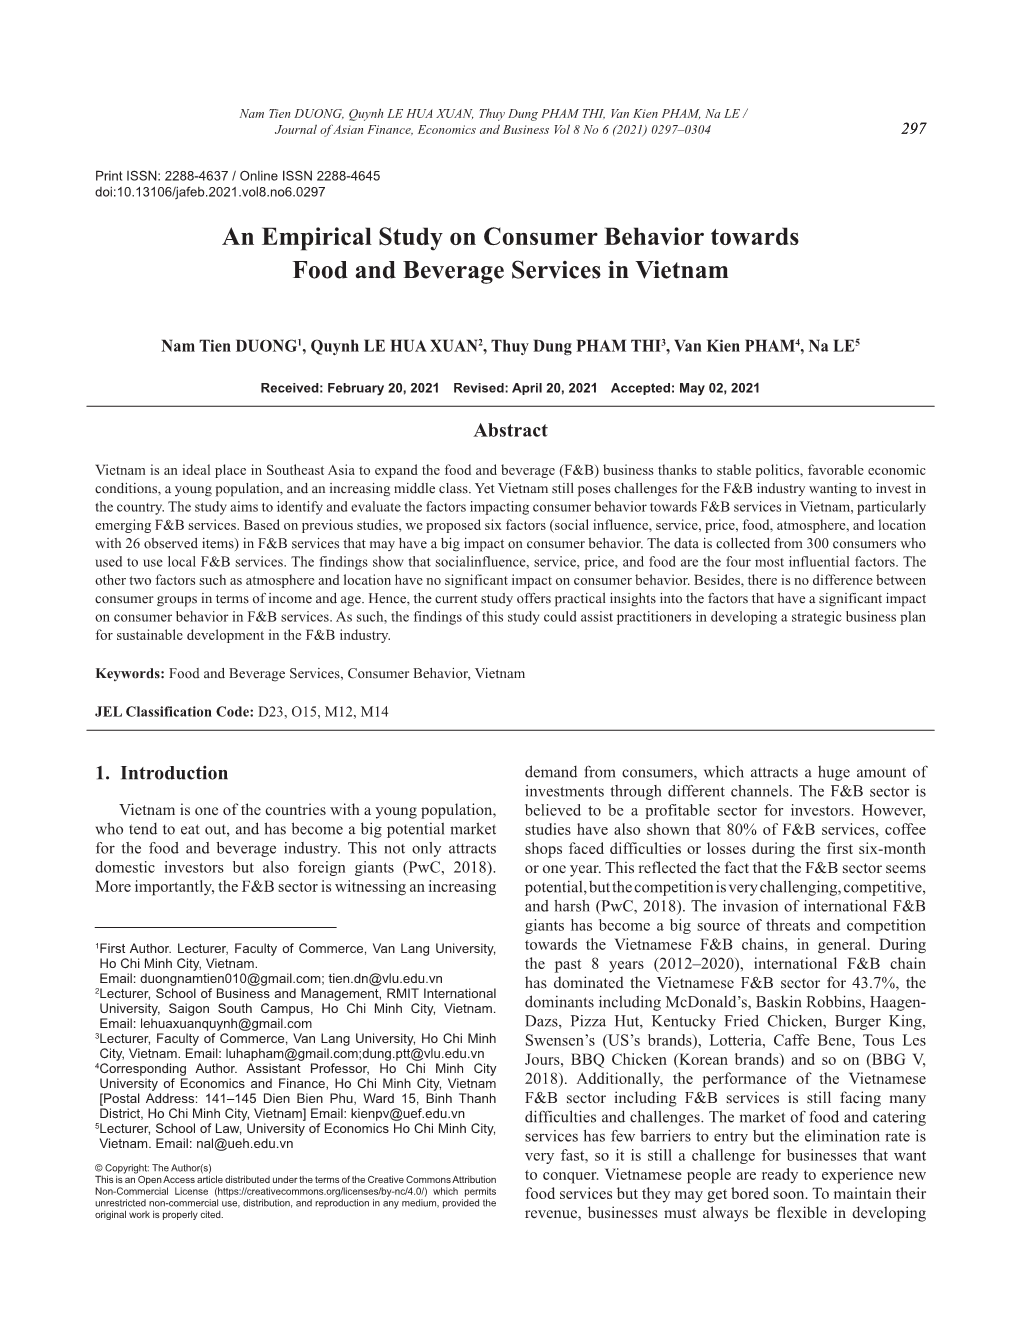 An Empirical Study on Consumer Behavior Towards Food and Beverage Services in Vietnam